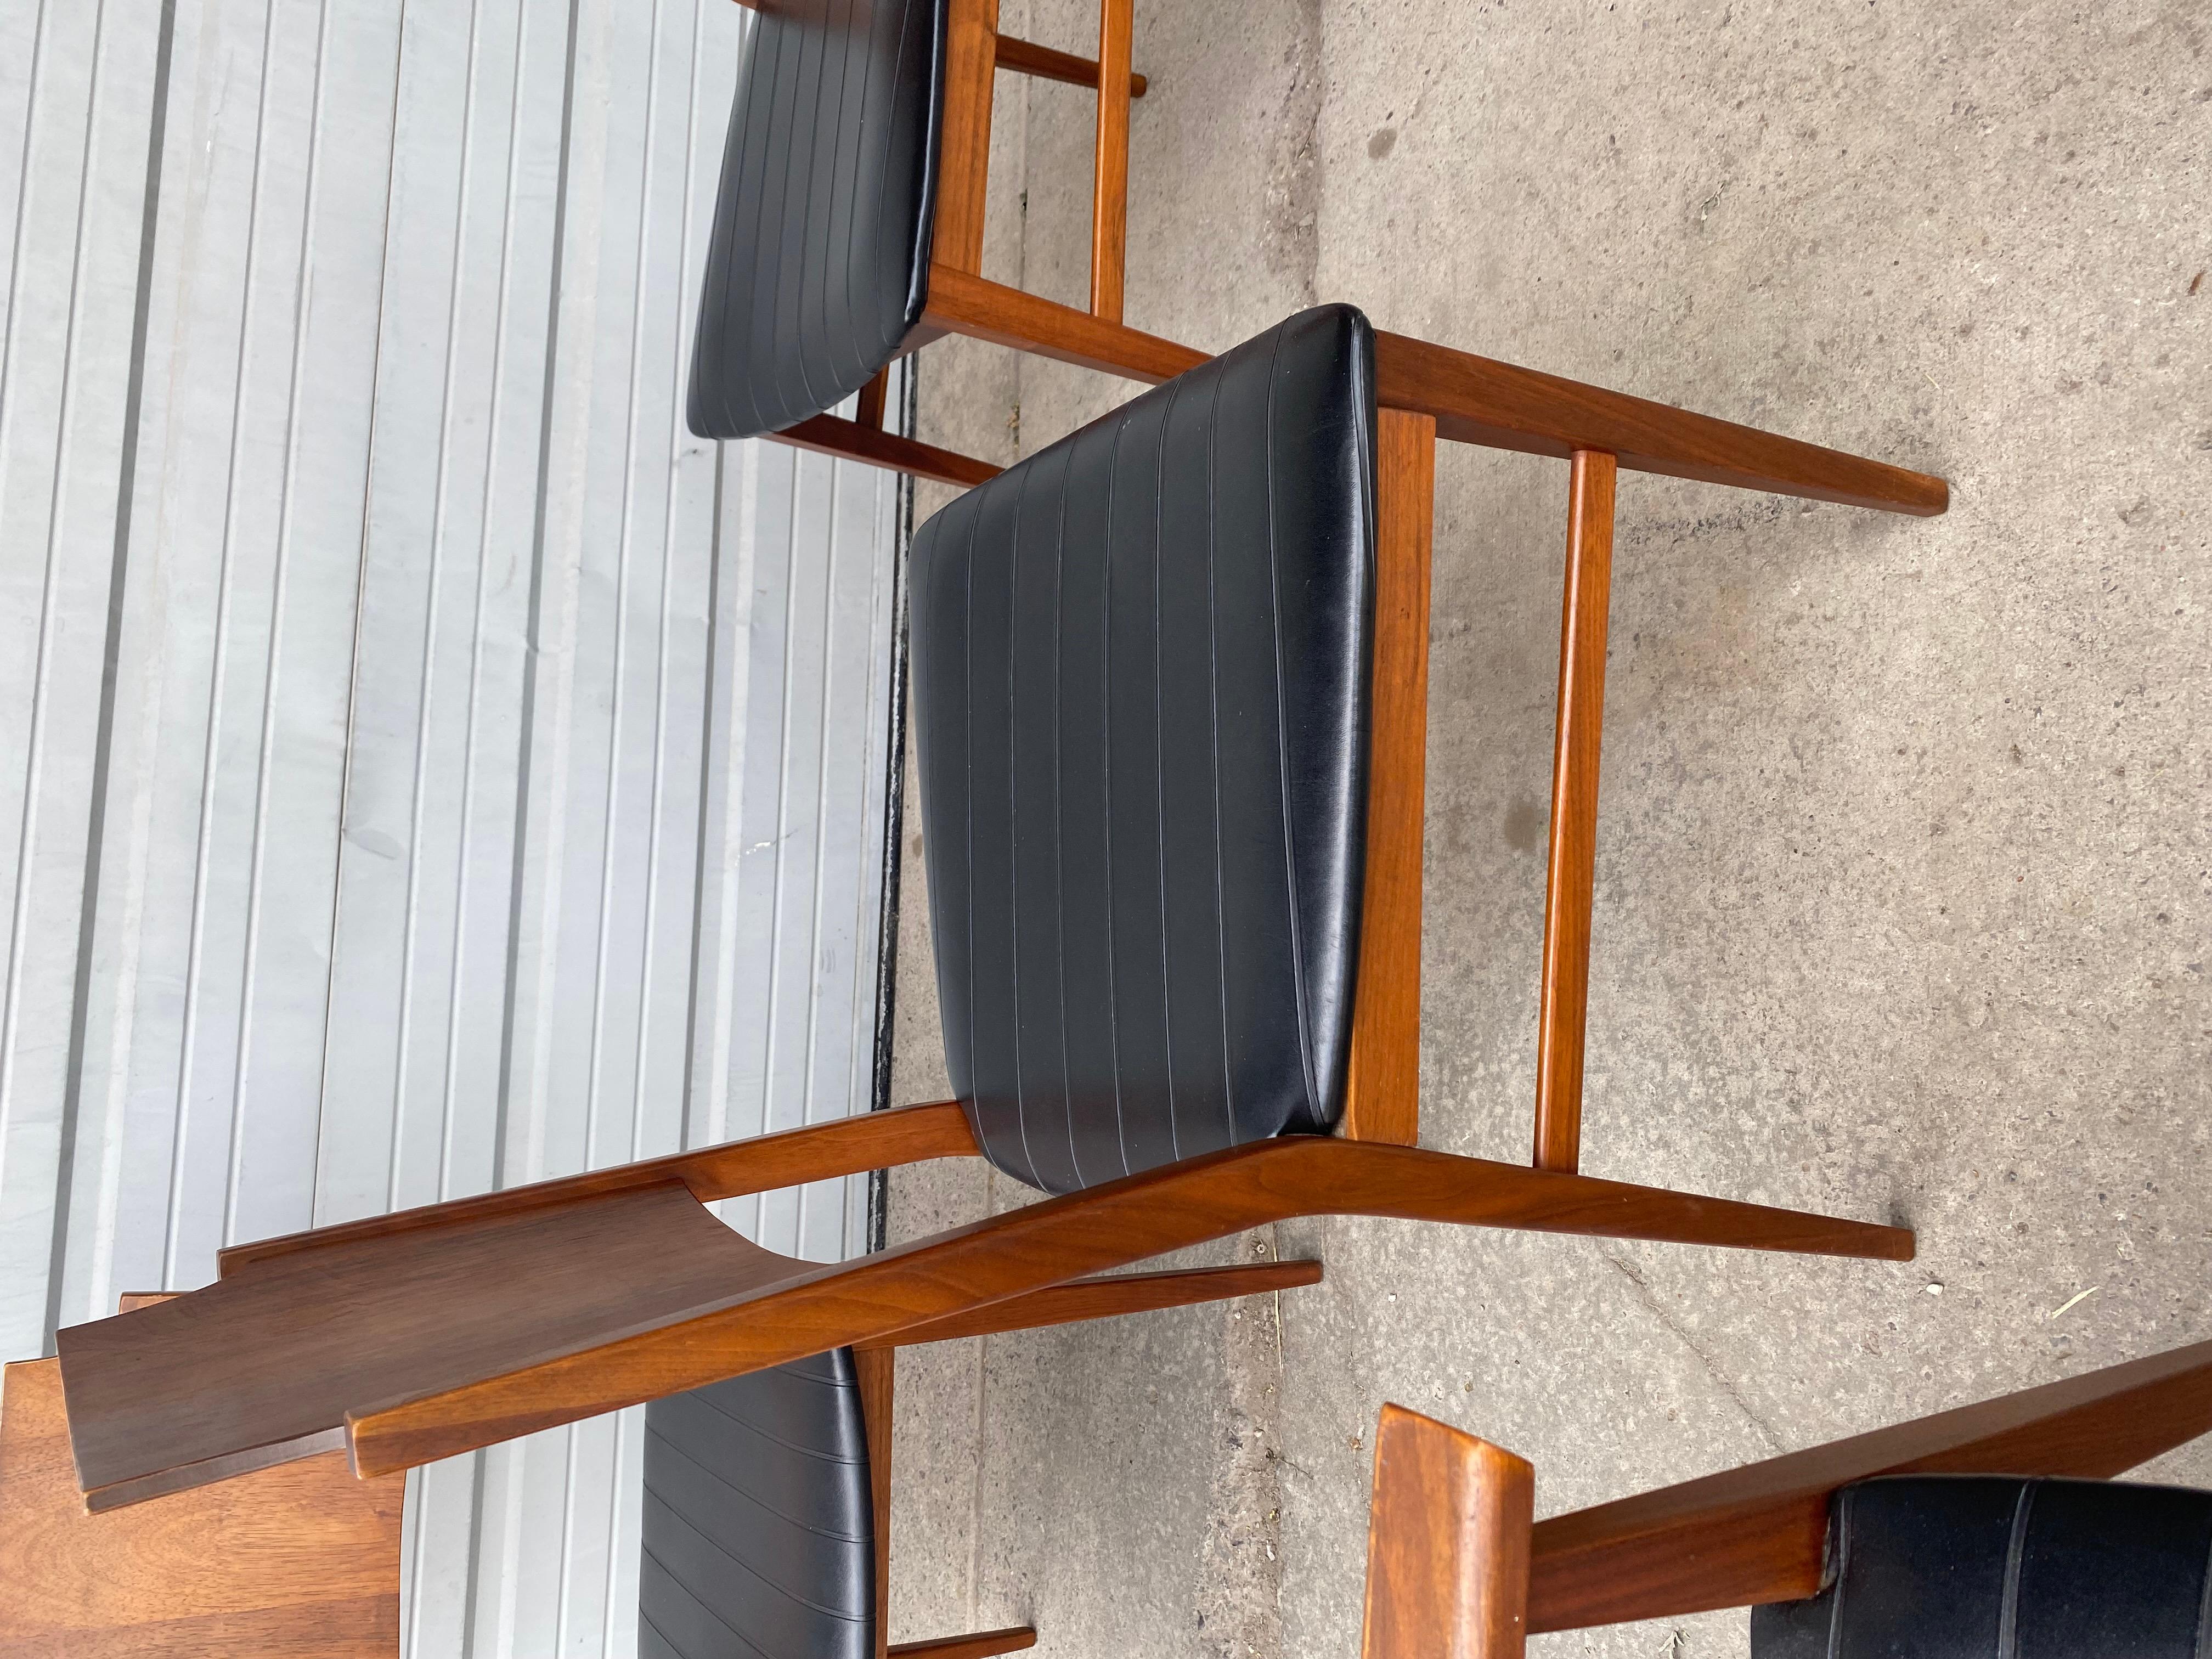 Set 6 Rosewood Dining Chairs, Paul McCobb, Delineator For Sale 2